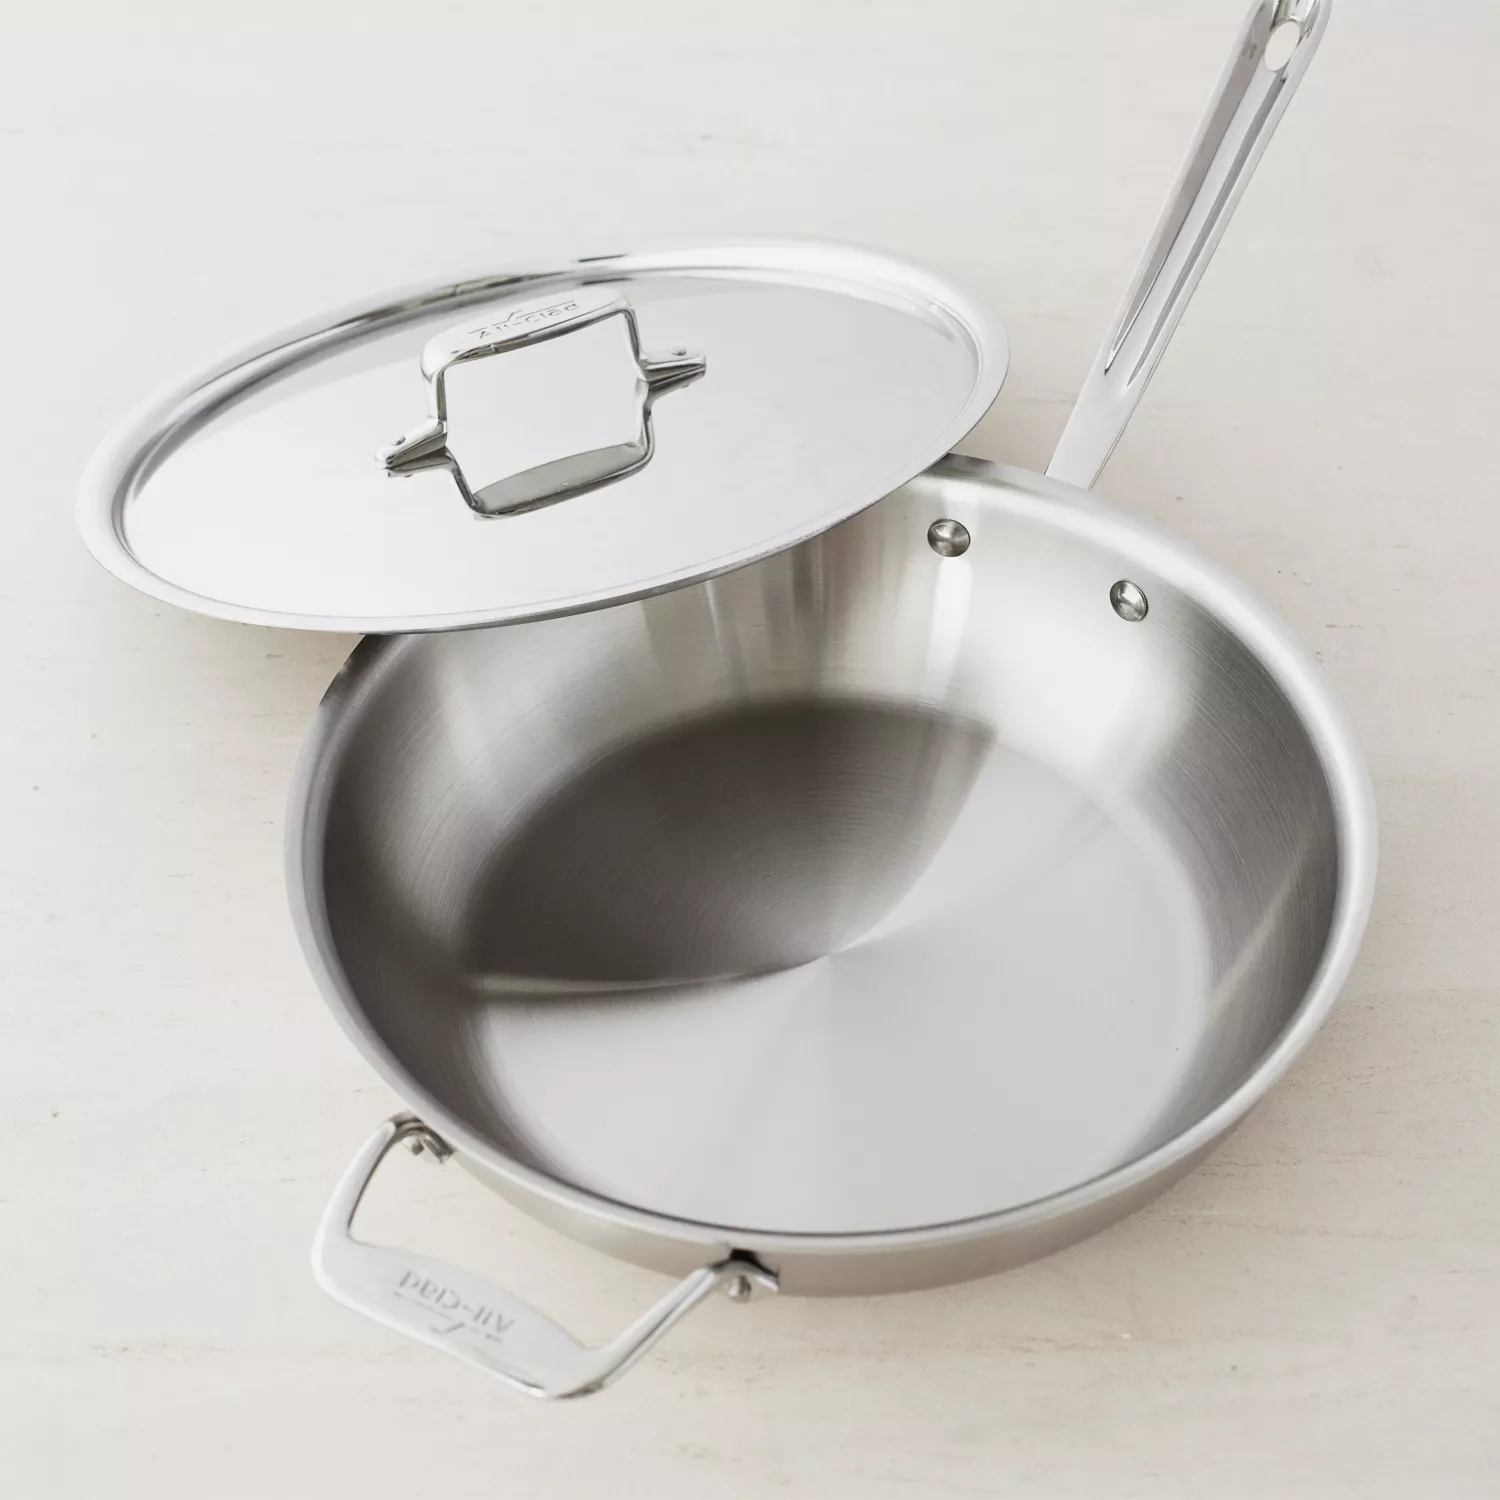 All-Clad Stainless Steel 4-Qt Weeknight Pan with Lid 